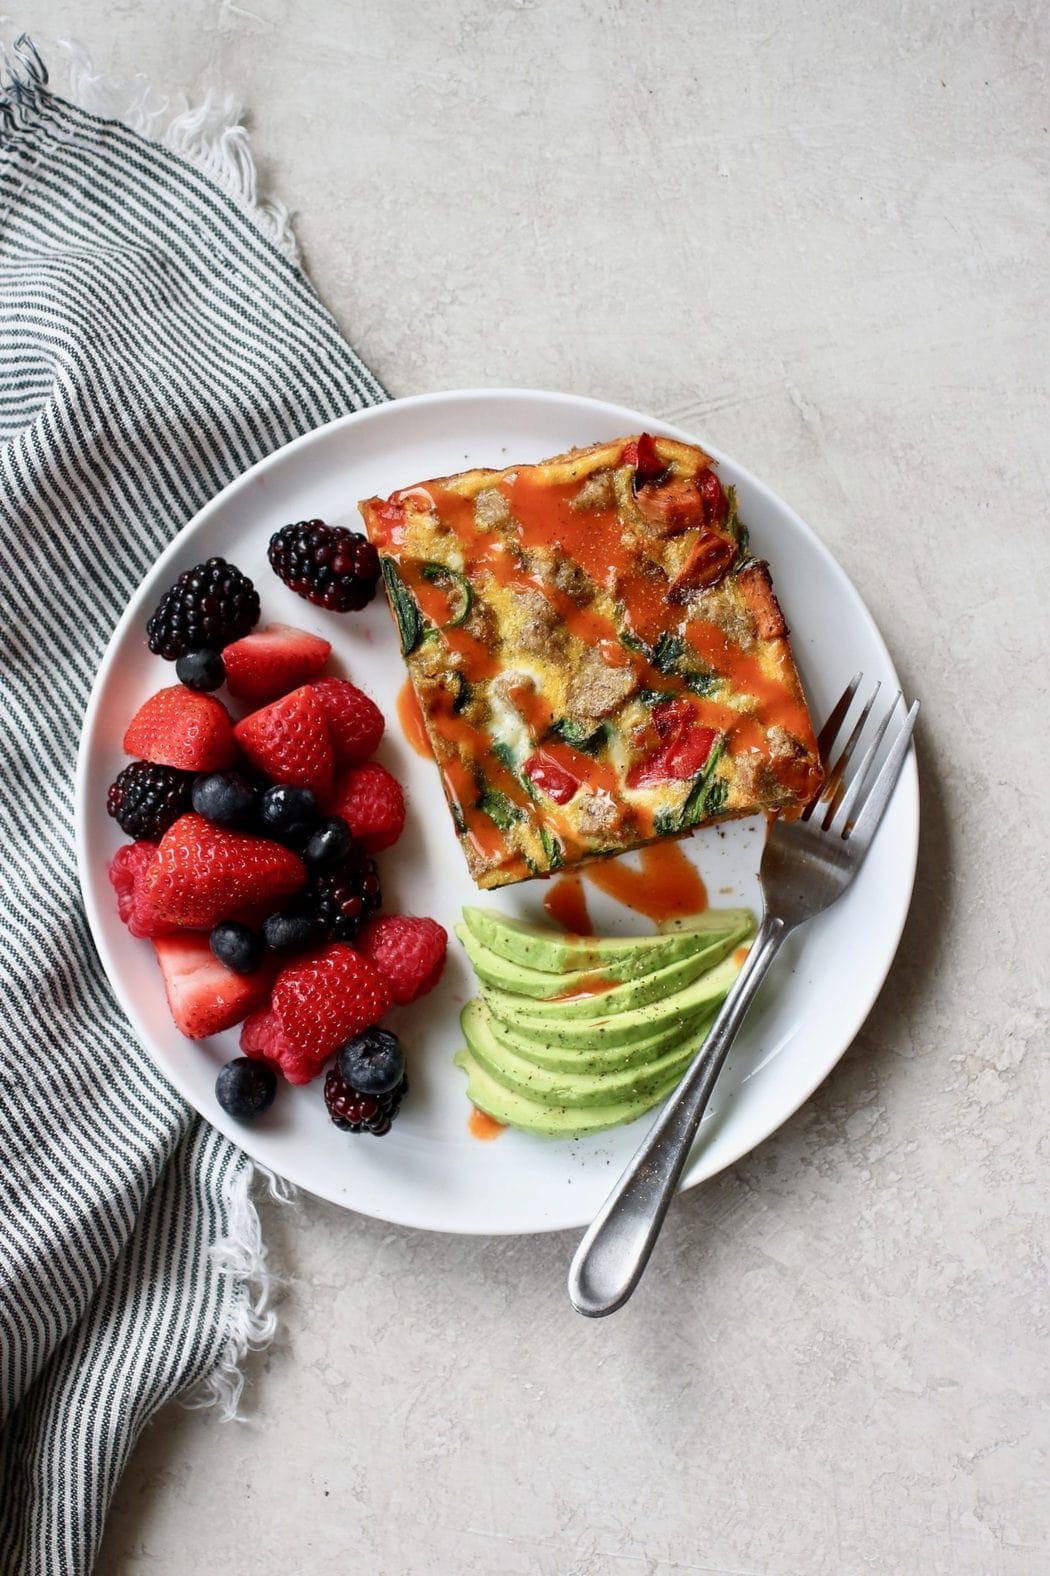 Egg bake with hot sauce drizzled on top, fresh berries, and slices of avocado on a white plate